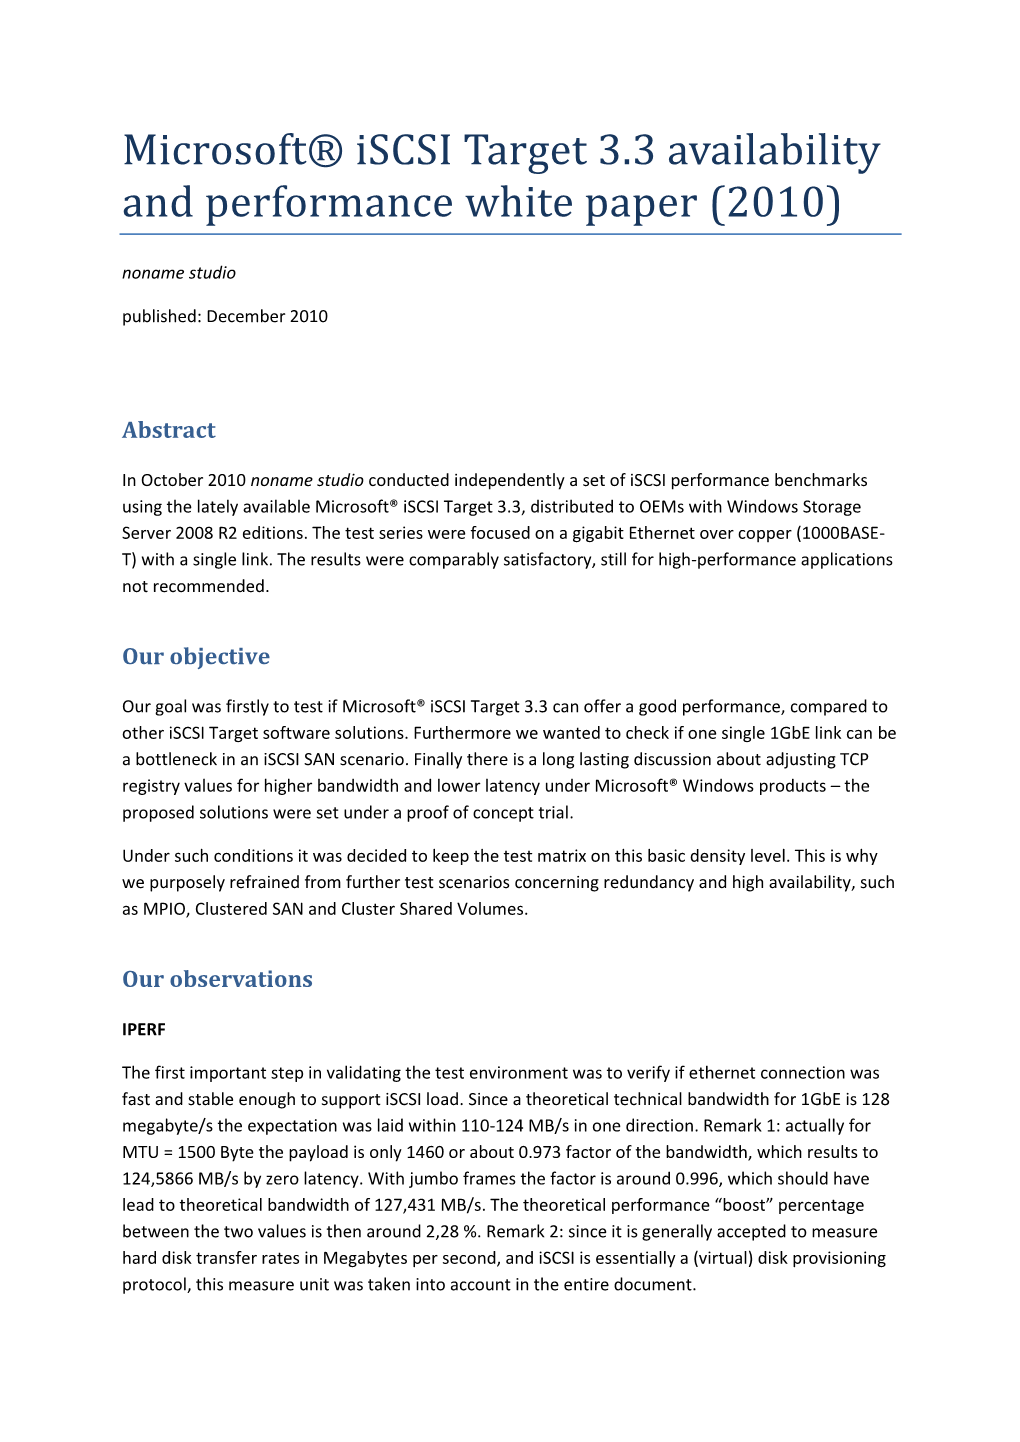 Microsoft® Iscsi Target 3.3 Availability and Performance White Paper (2010) Noname Studio Published: December 2010